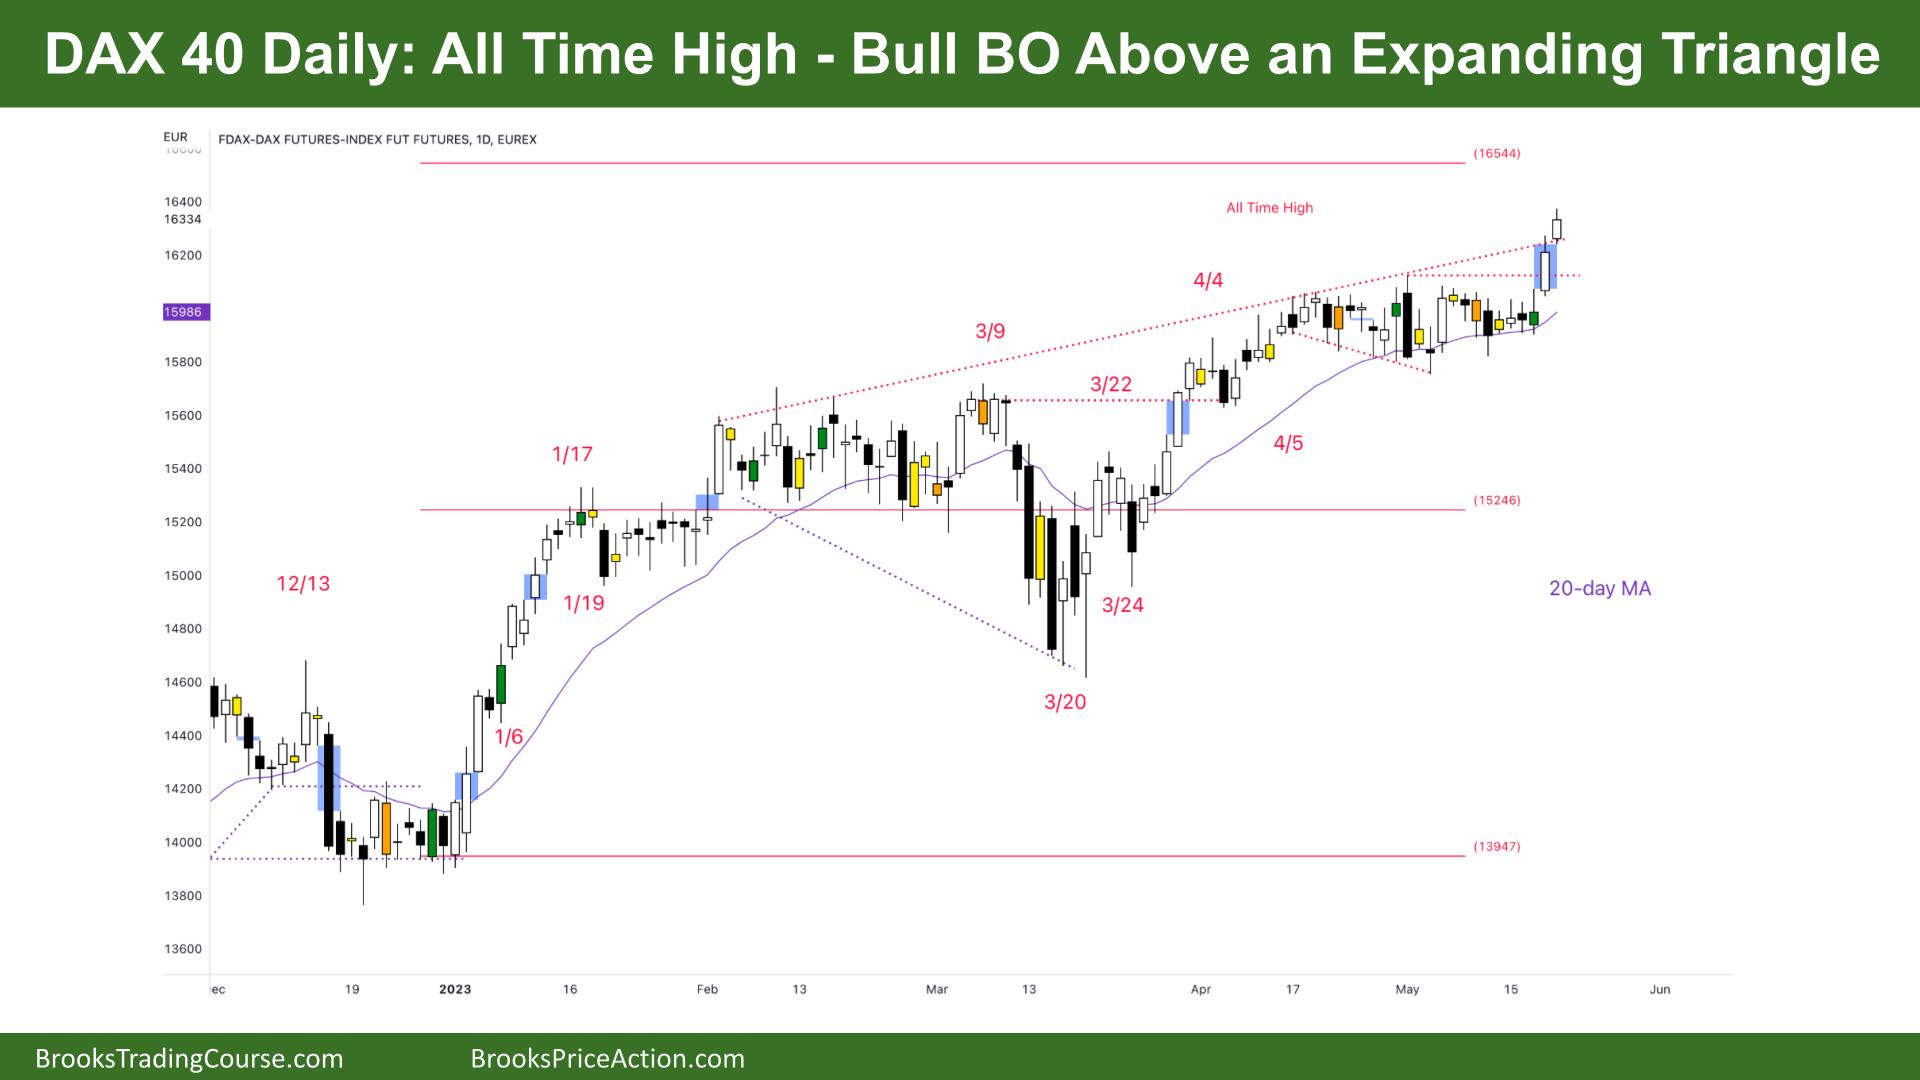 DAX 40 All Time High - Bull BO Above an Expanding Triangle